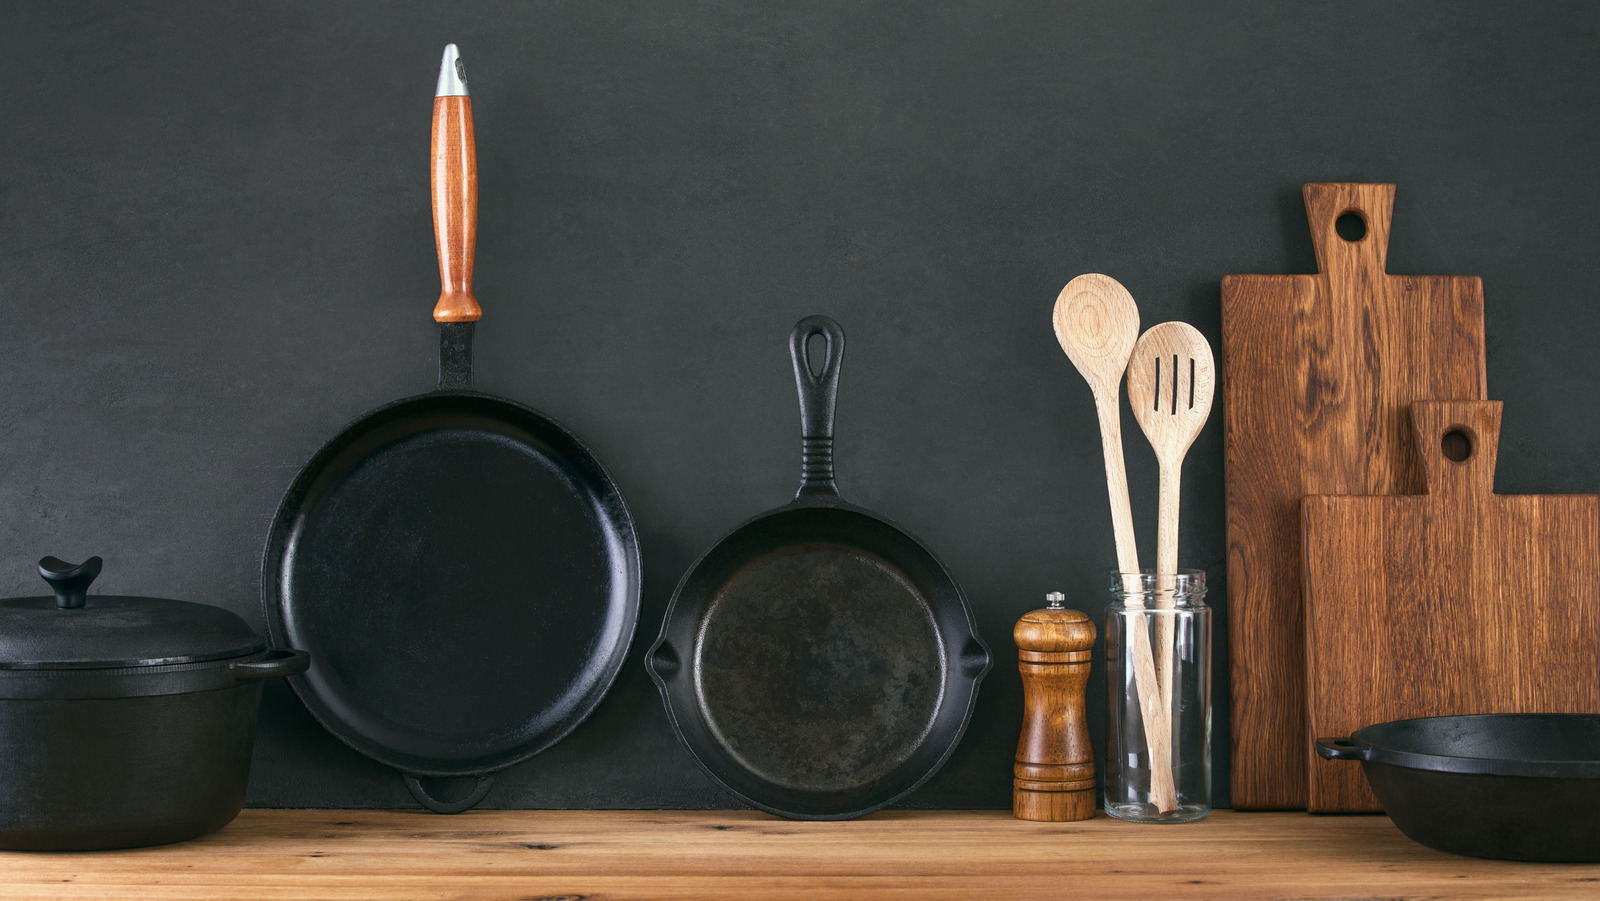 https://www.tastingtable.com/img/gallery/the-truth-about-cast-iron-pans/l-intro-1620752854.jpg